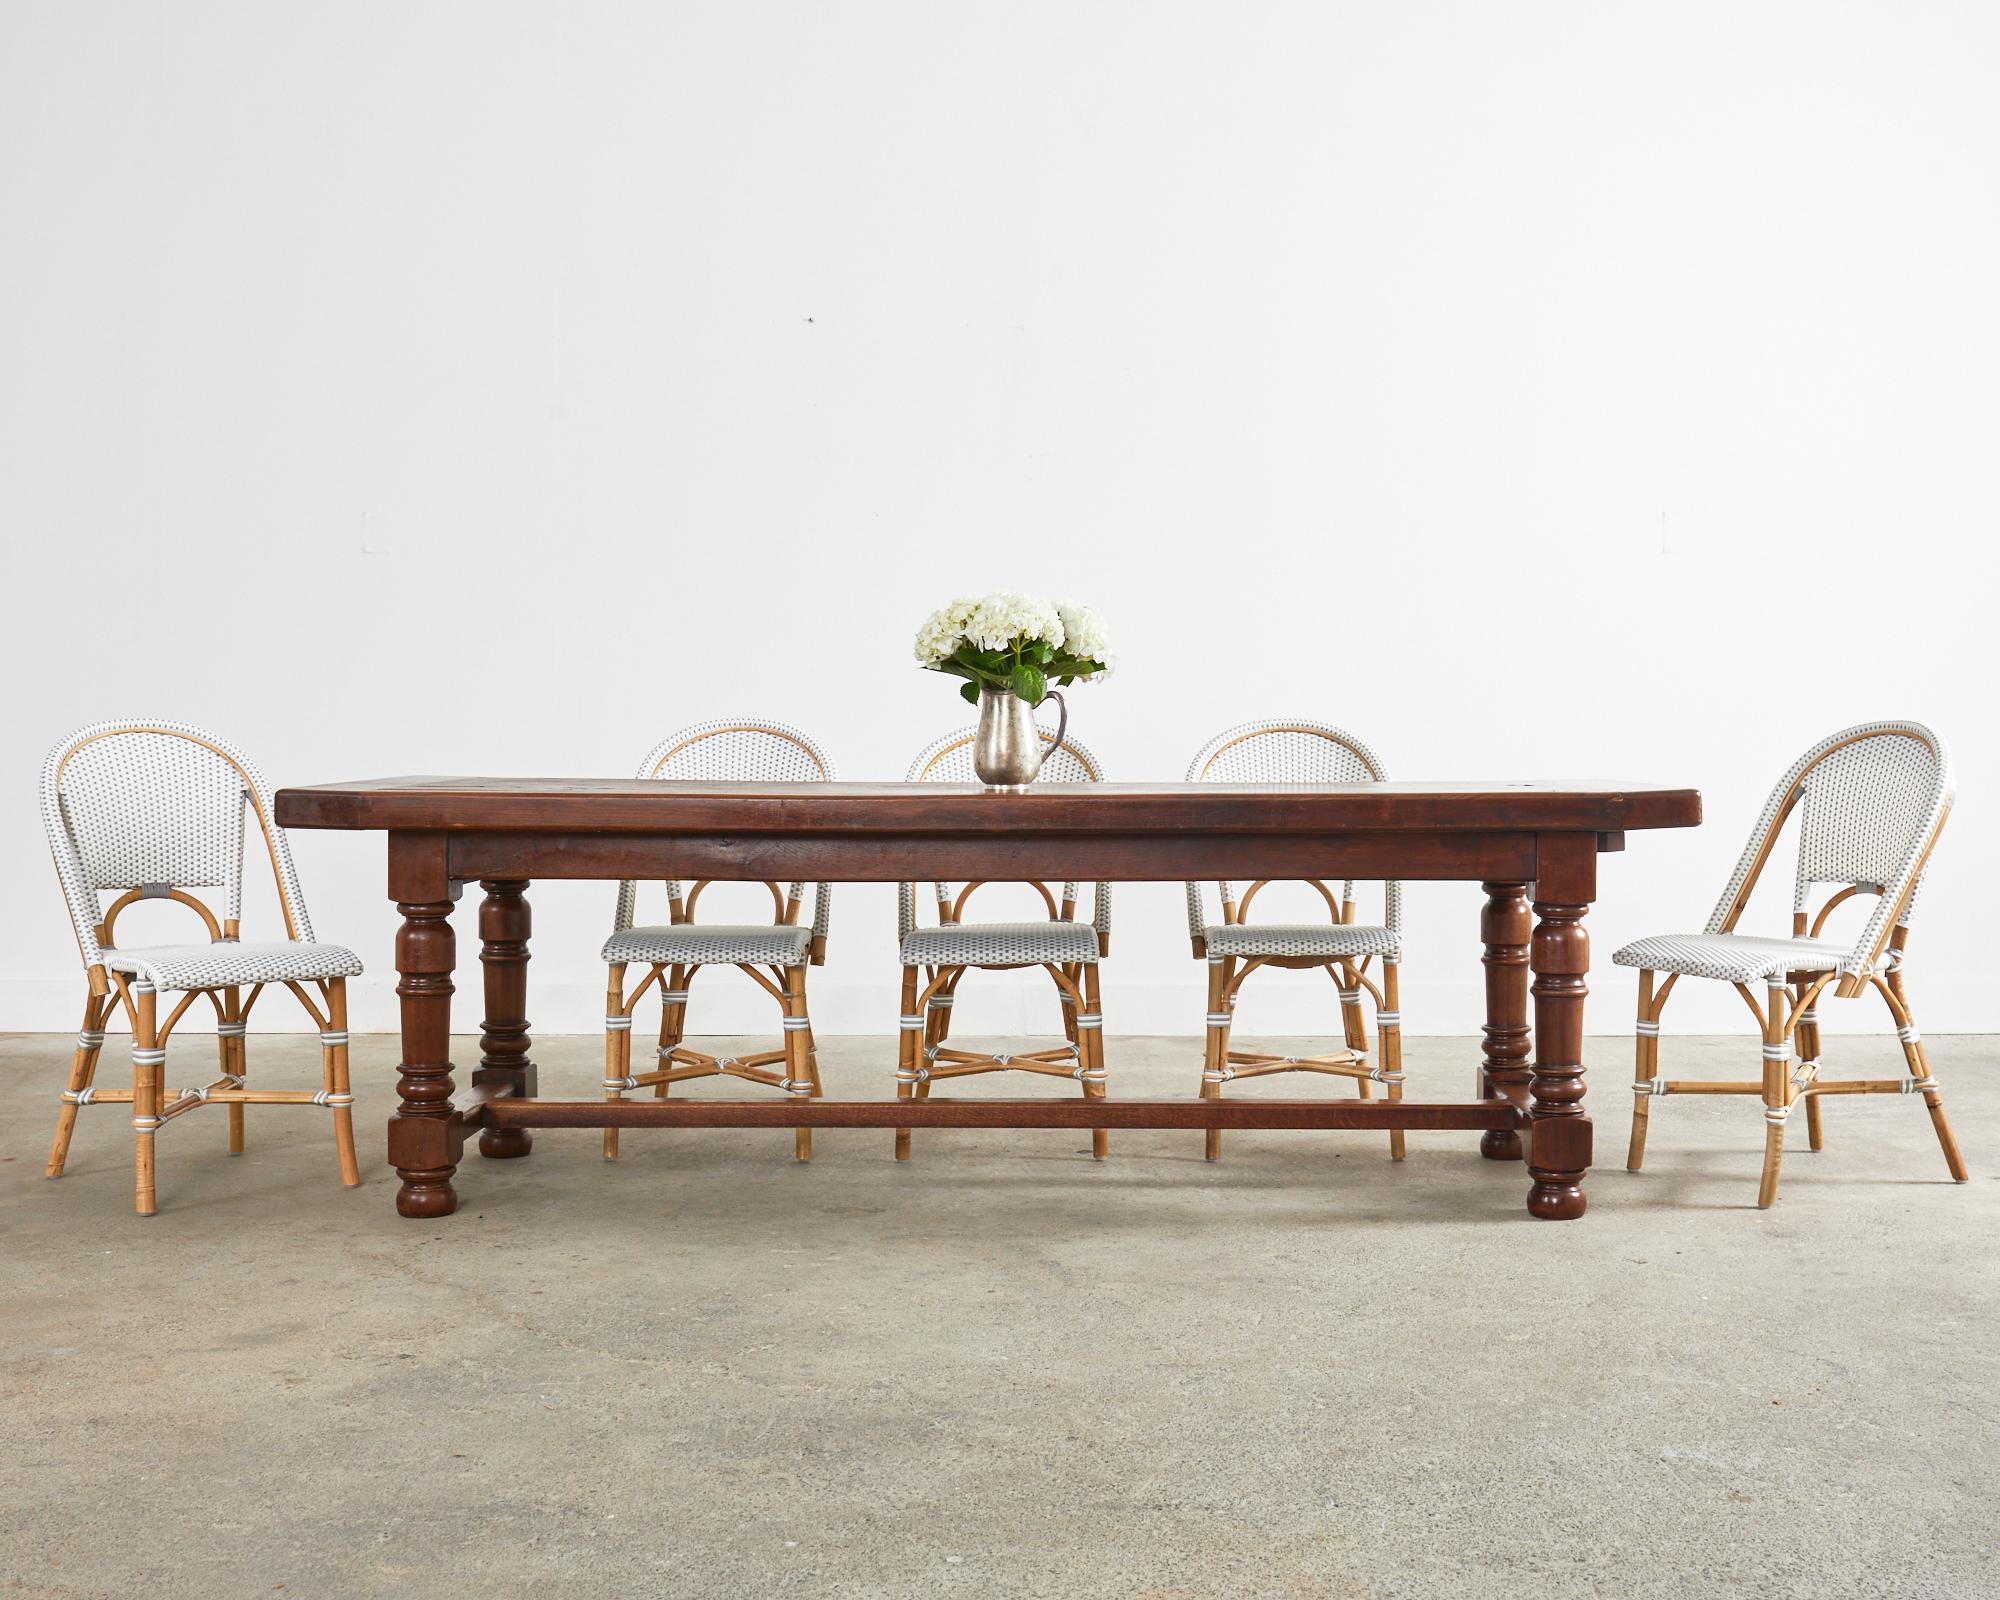 Grand late 19th century country English provincial oak farmhouse dining table constructed on a massive scale. Very heavy and solid featuring a 2.5-inch thick top with bread board ends. The top is supported by a trestle style base with an 18 inch